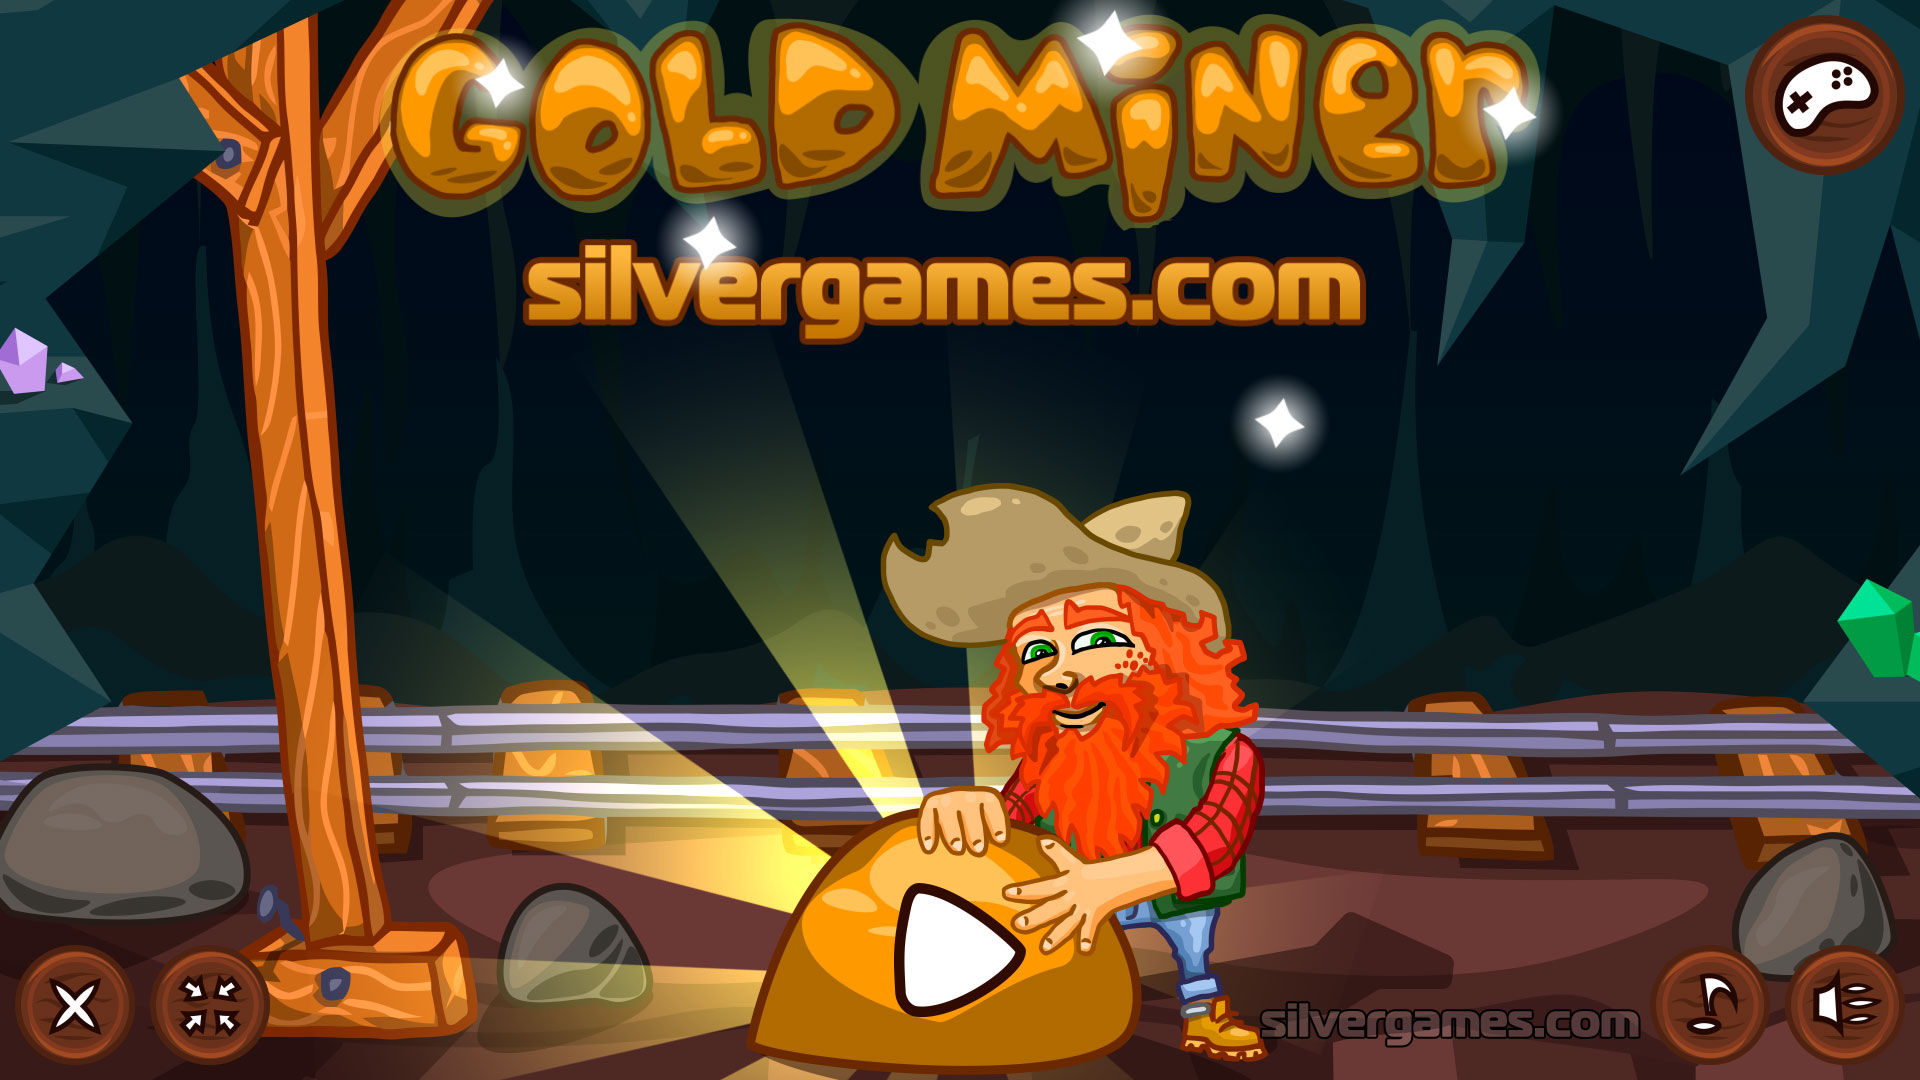 NEW FAVORITE GAME Mining for $1,000,000 with ADVANCED GOLD MINING MACHINES